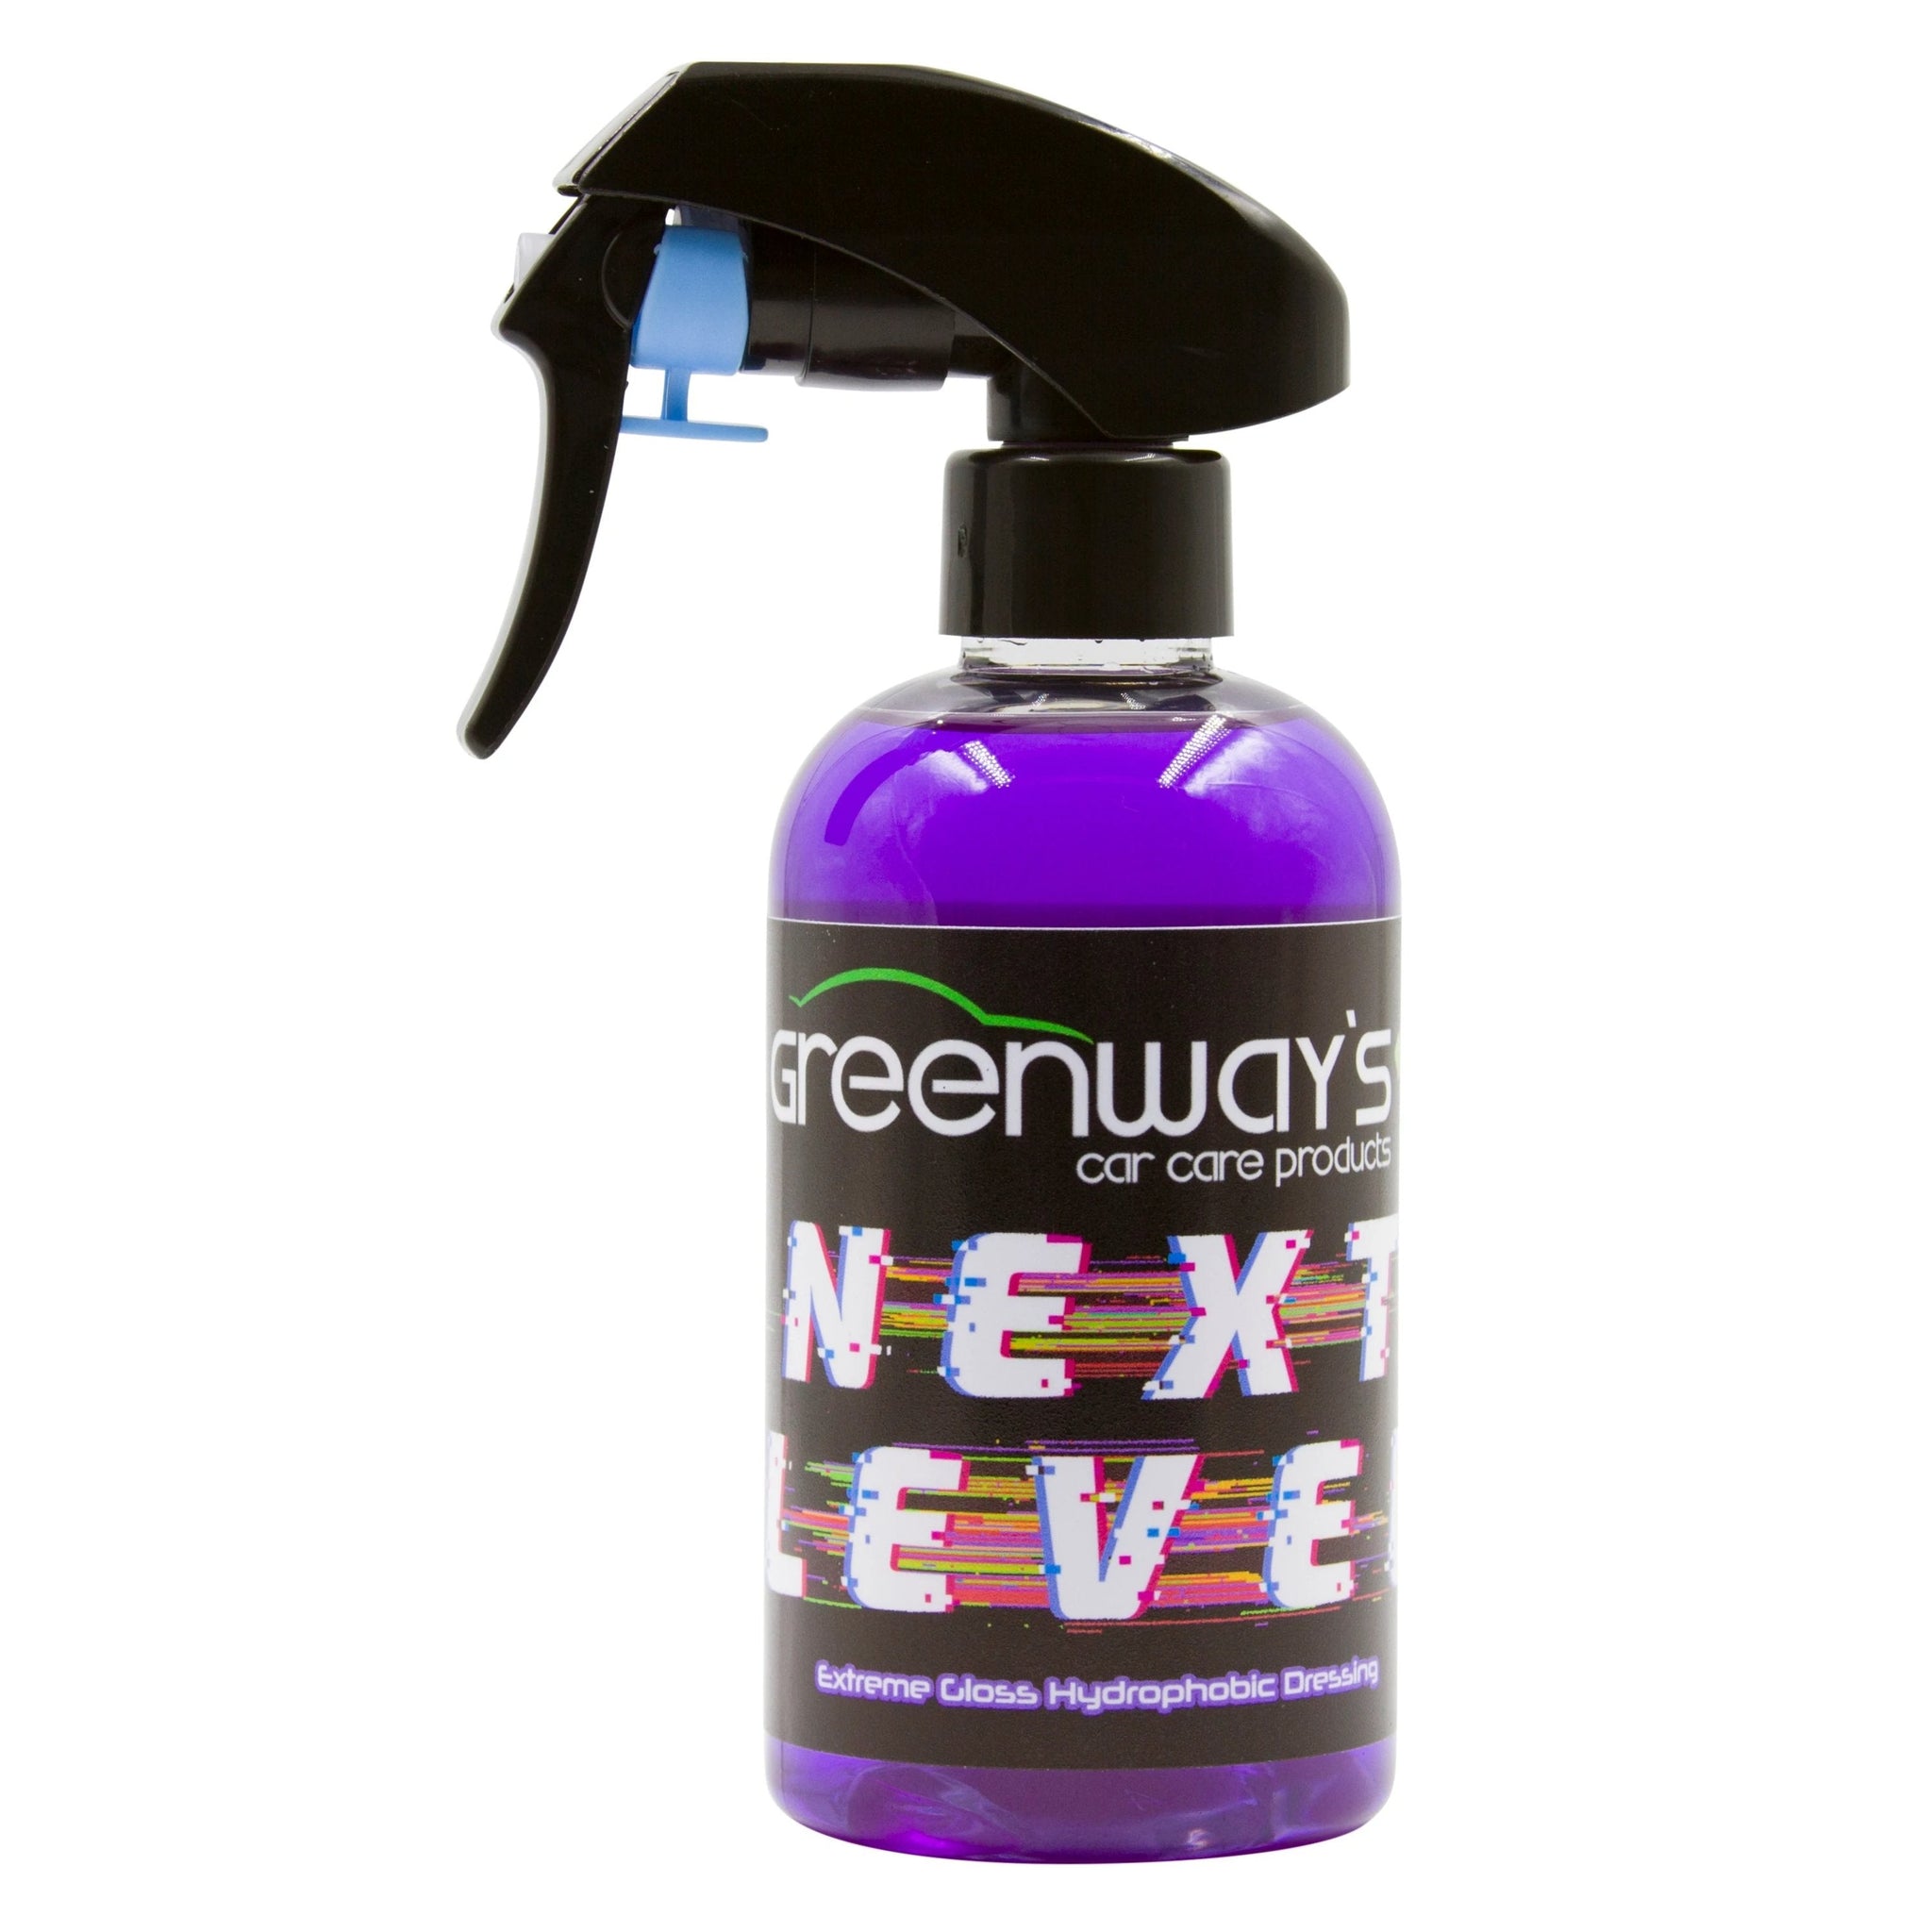 Greenway’s Next Level, extremely glossy, hydrophobic, silicone-free, water-based, sprayable tire shine. 8 ounces.